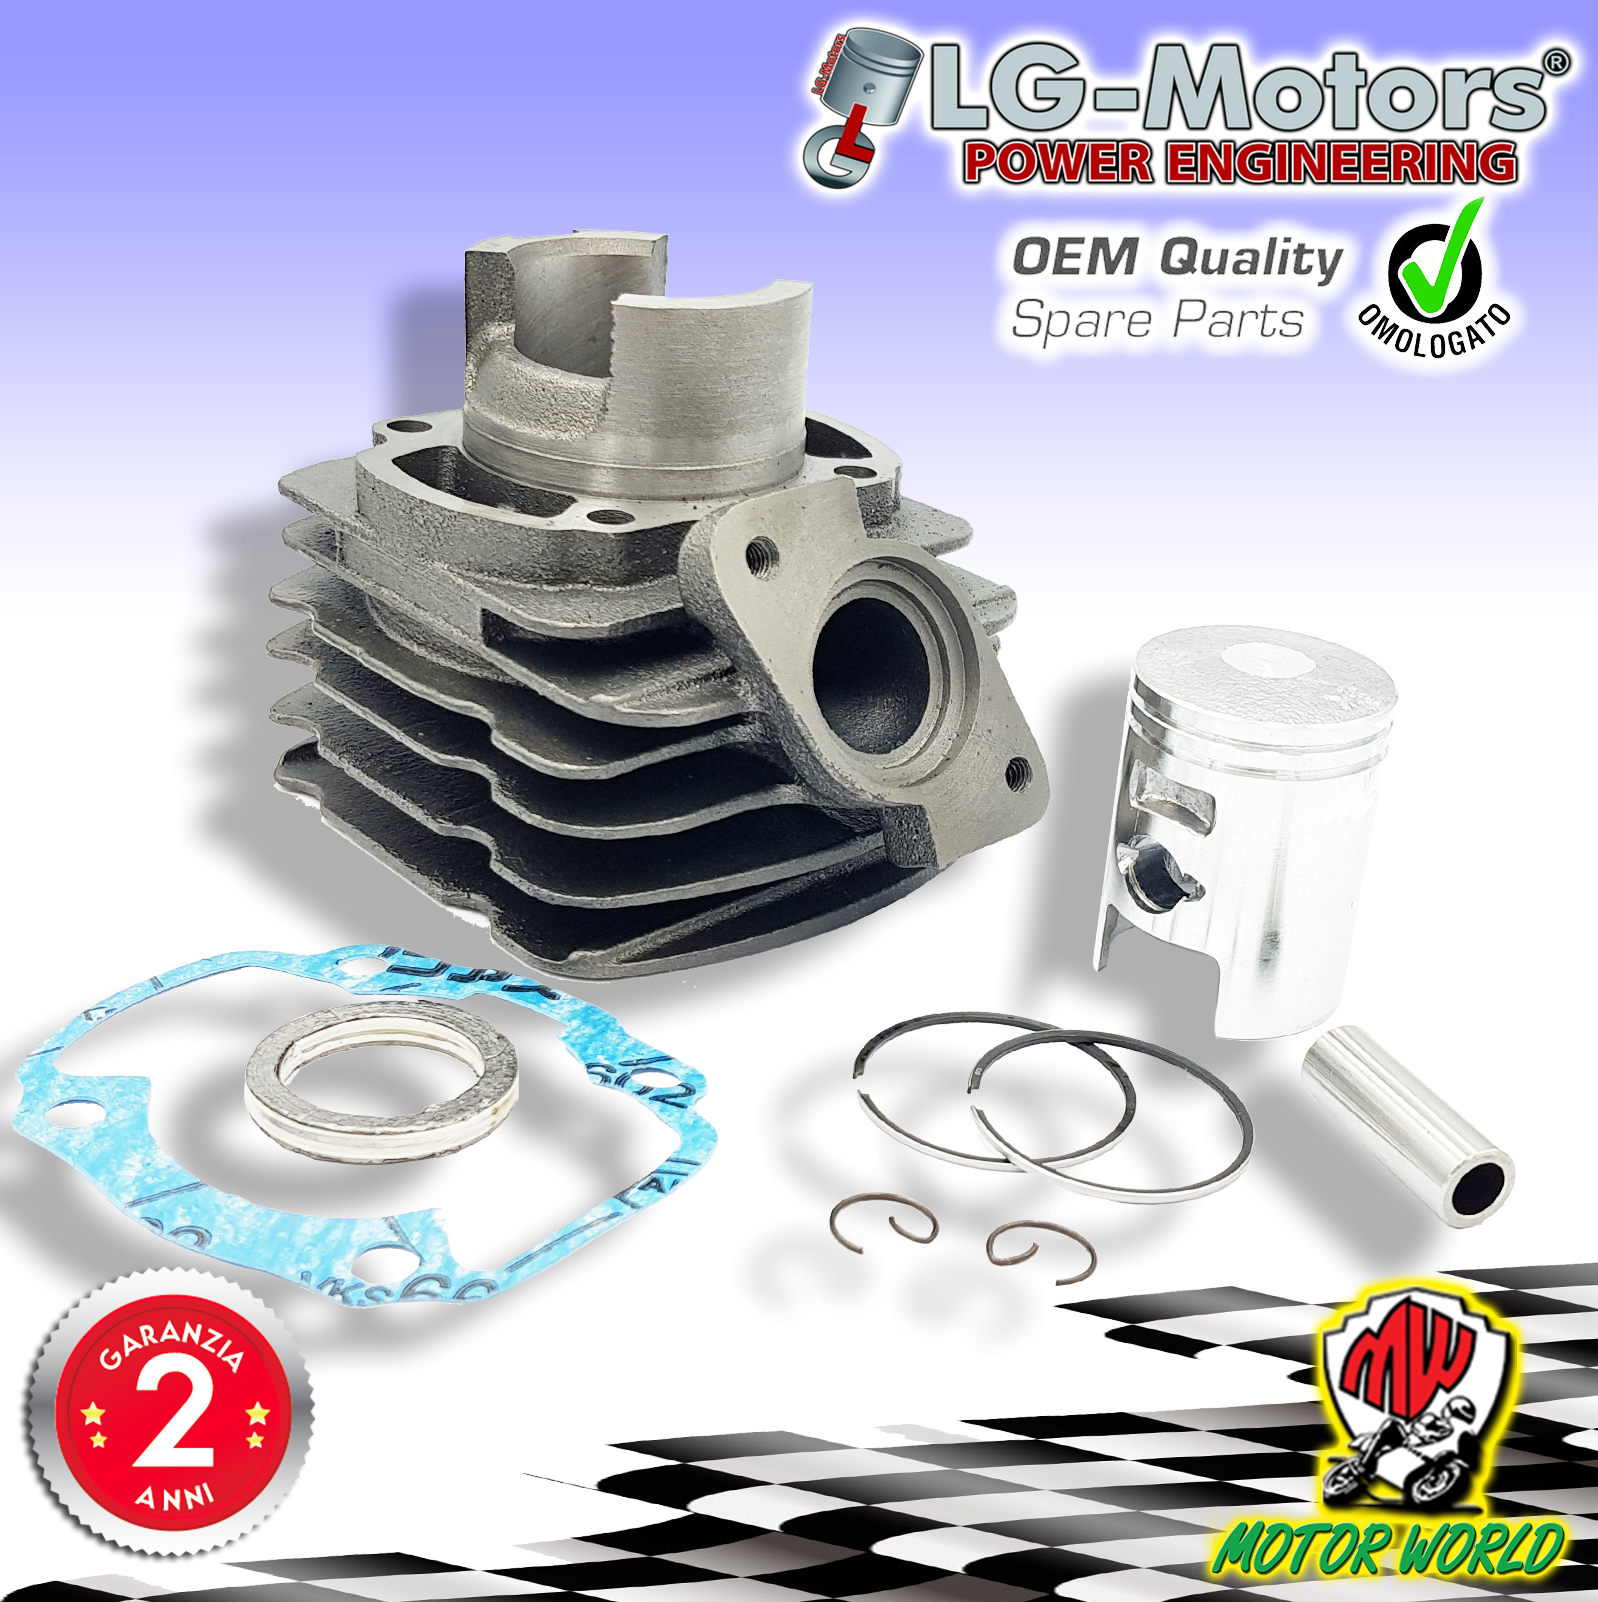 GRUPPO TERMICO 70cc CILINDRO SCOOTER ø47 RACING MBK BOOSTER 50 2T euro